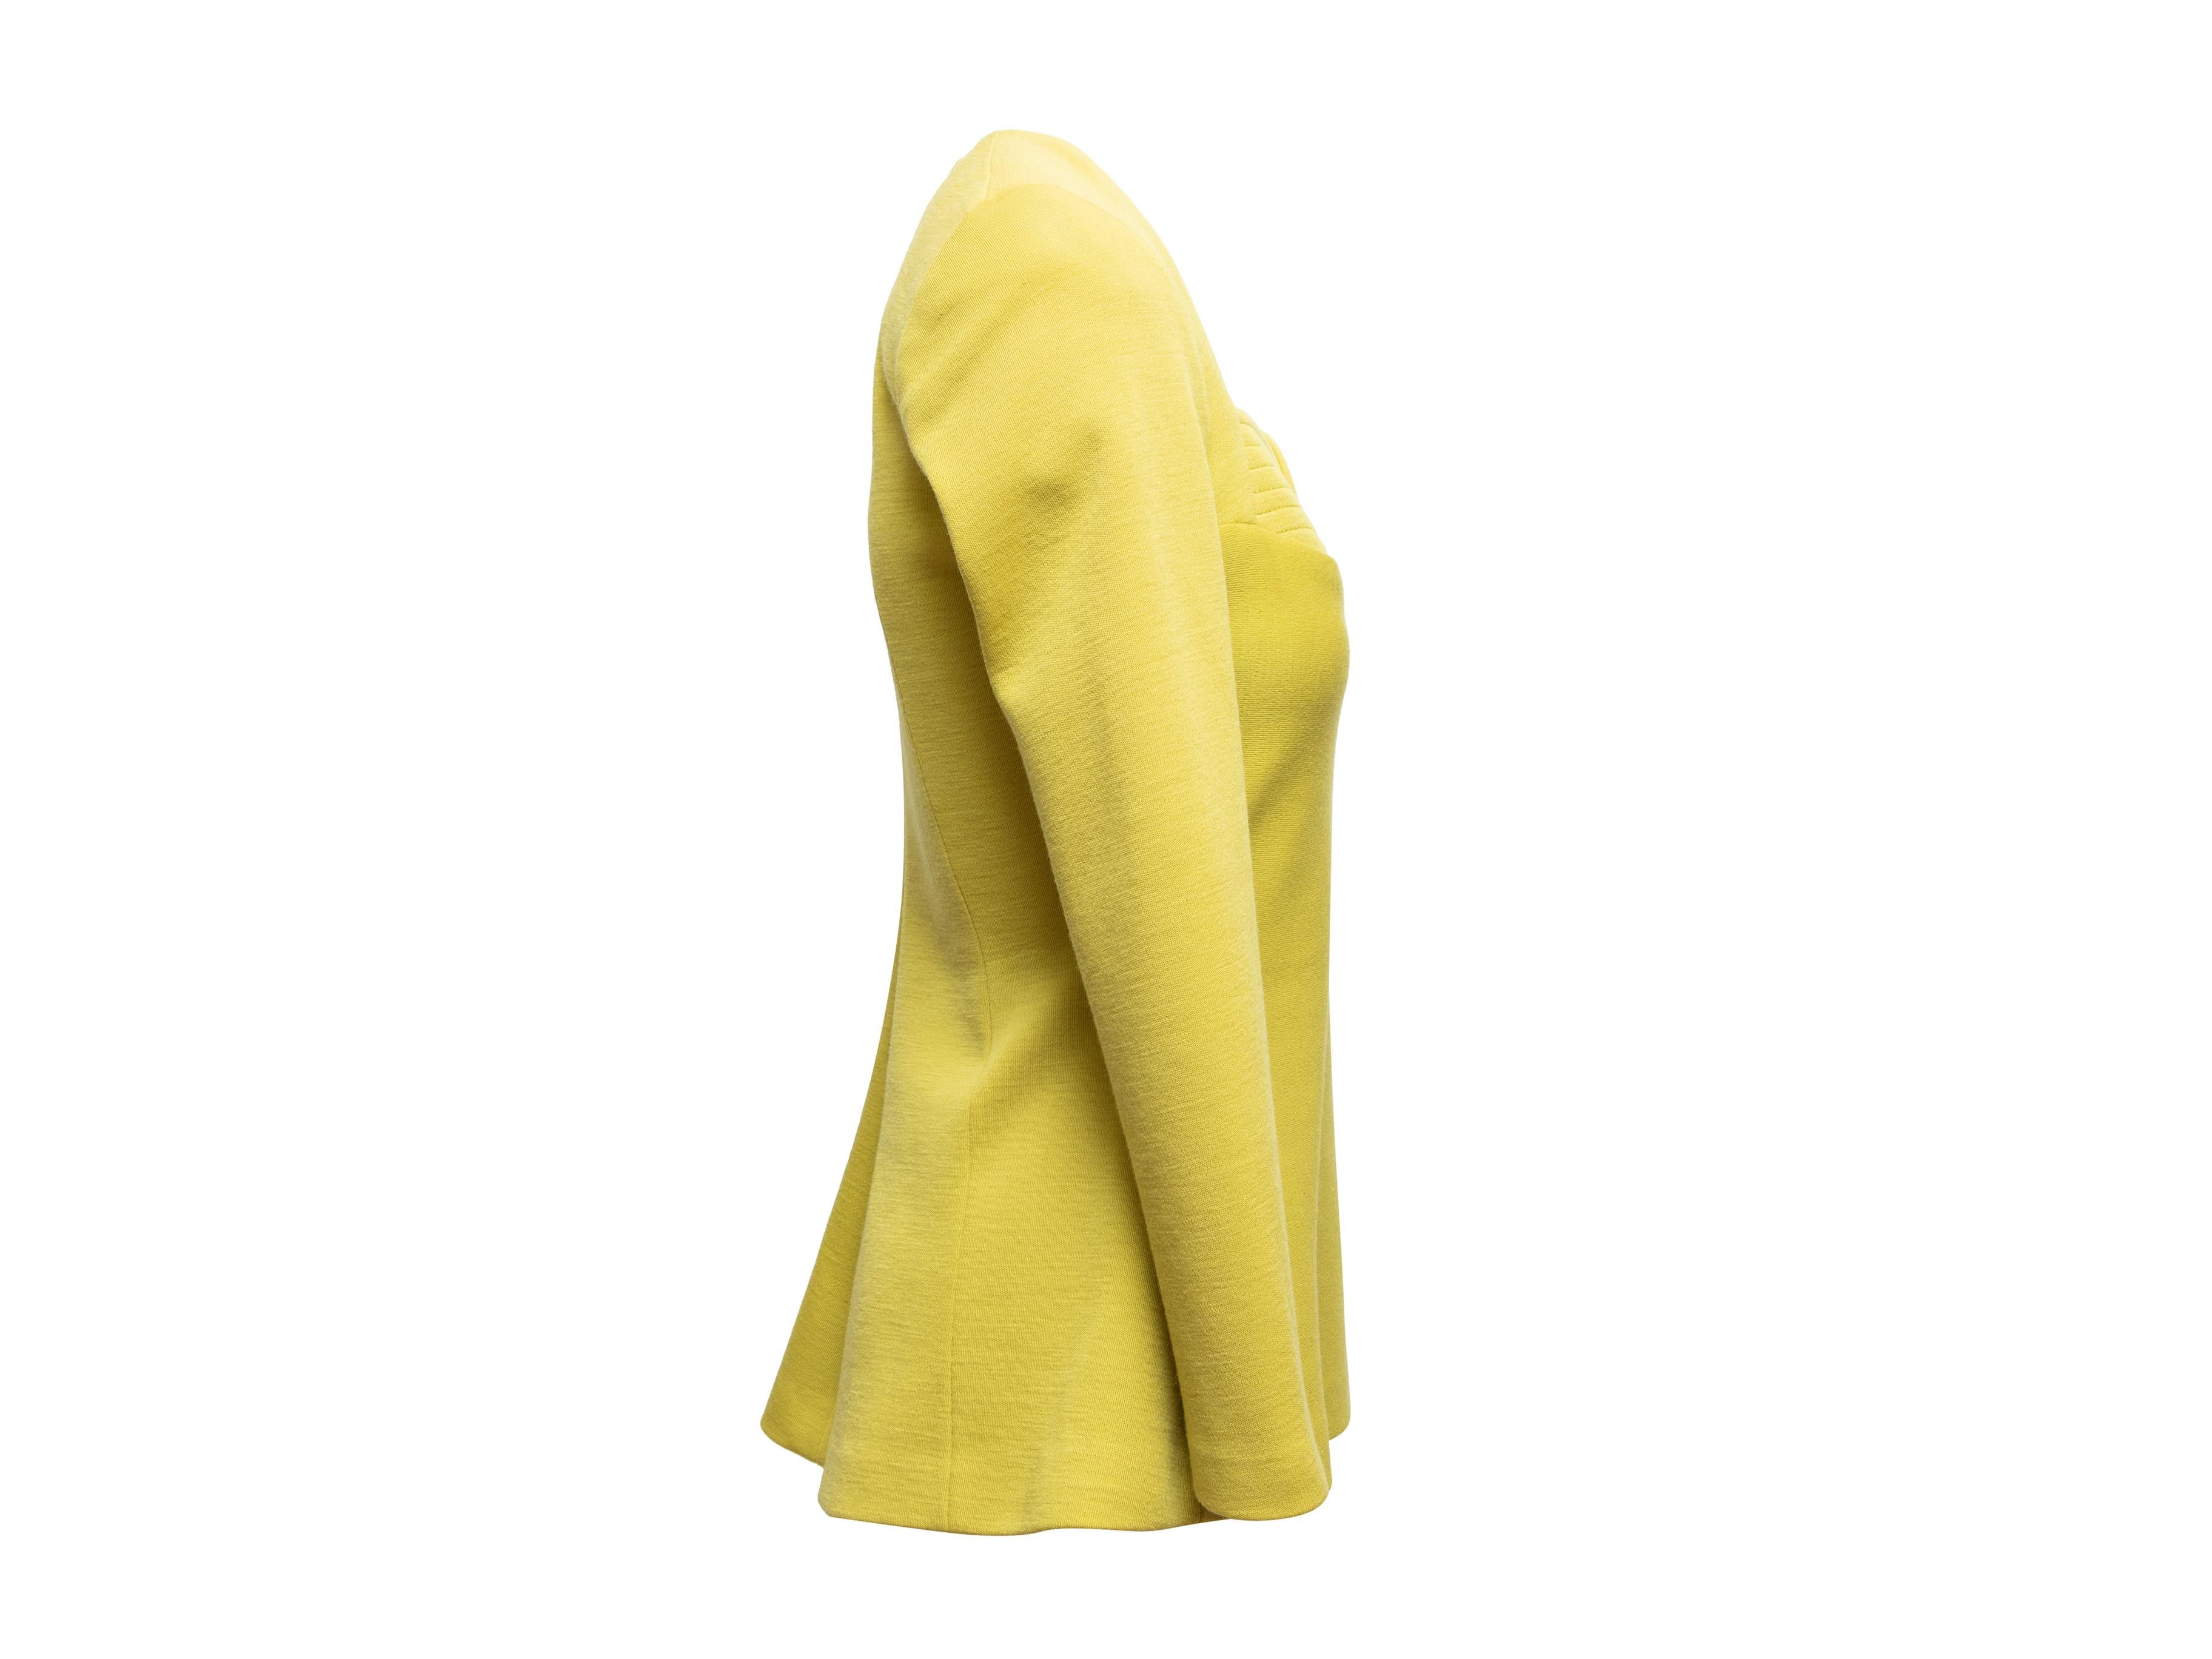 Product Details: Vintage chartreuse long sleeve top by Marc Bouwer. Sweetheart neckline. Zip closure at center back. 32